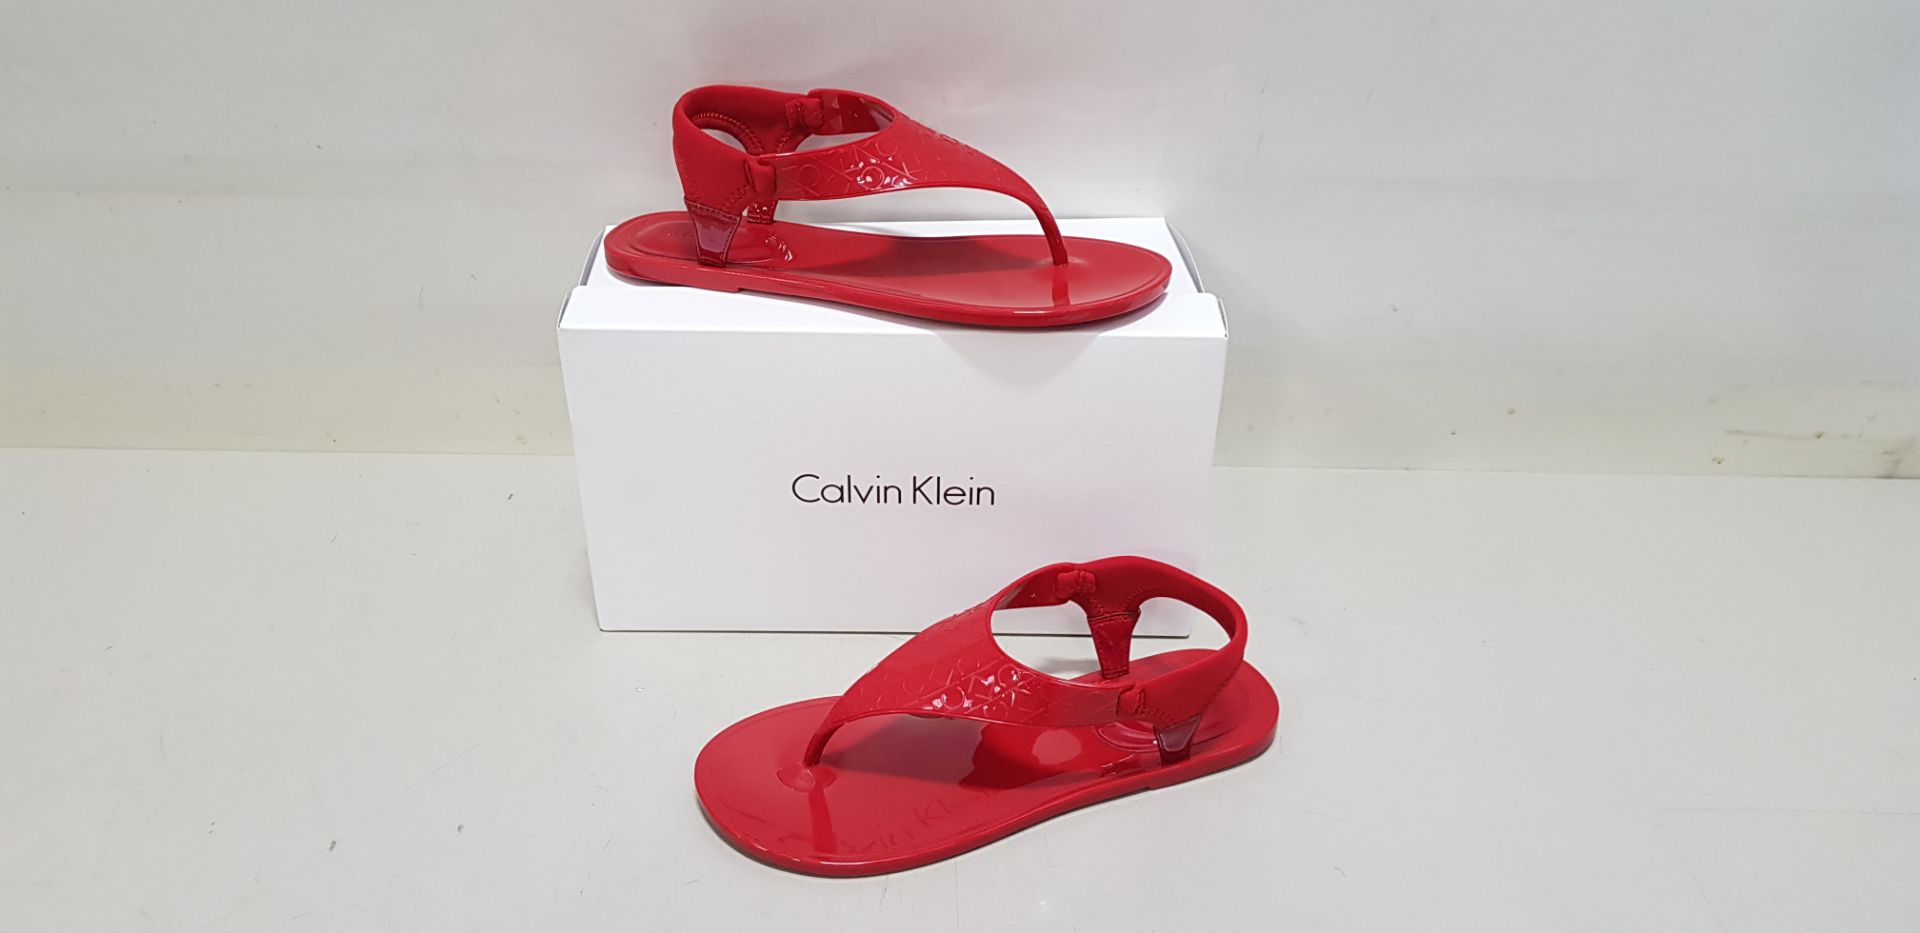 10 X BRAND NEW CALVIN KLEIN JANNY MOULDED SANDALS IN CRIMSON RED SIZE UK 6